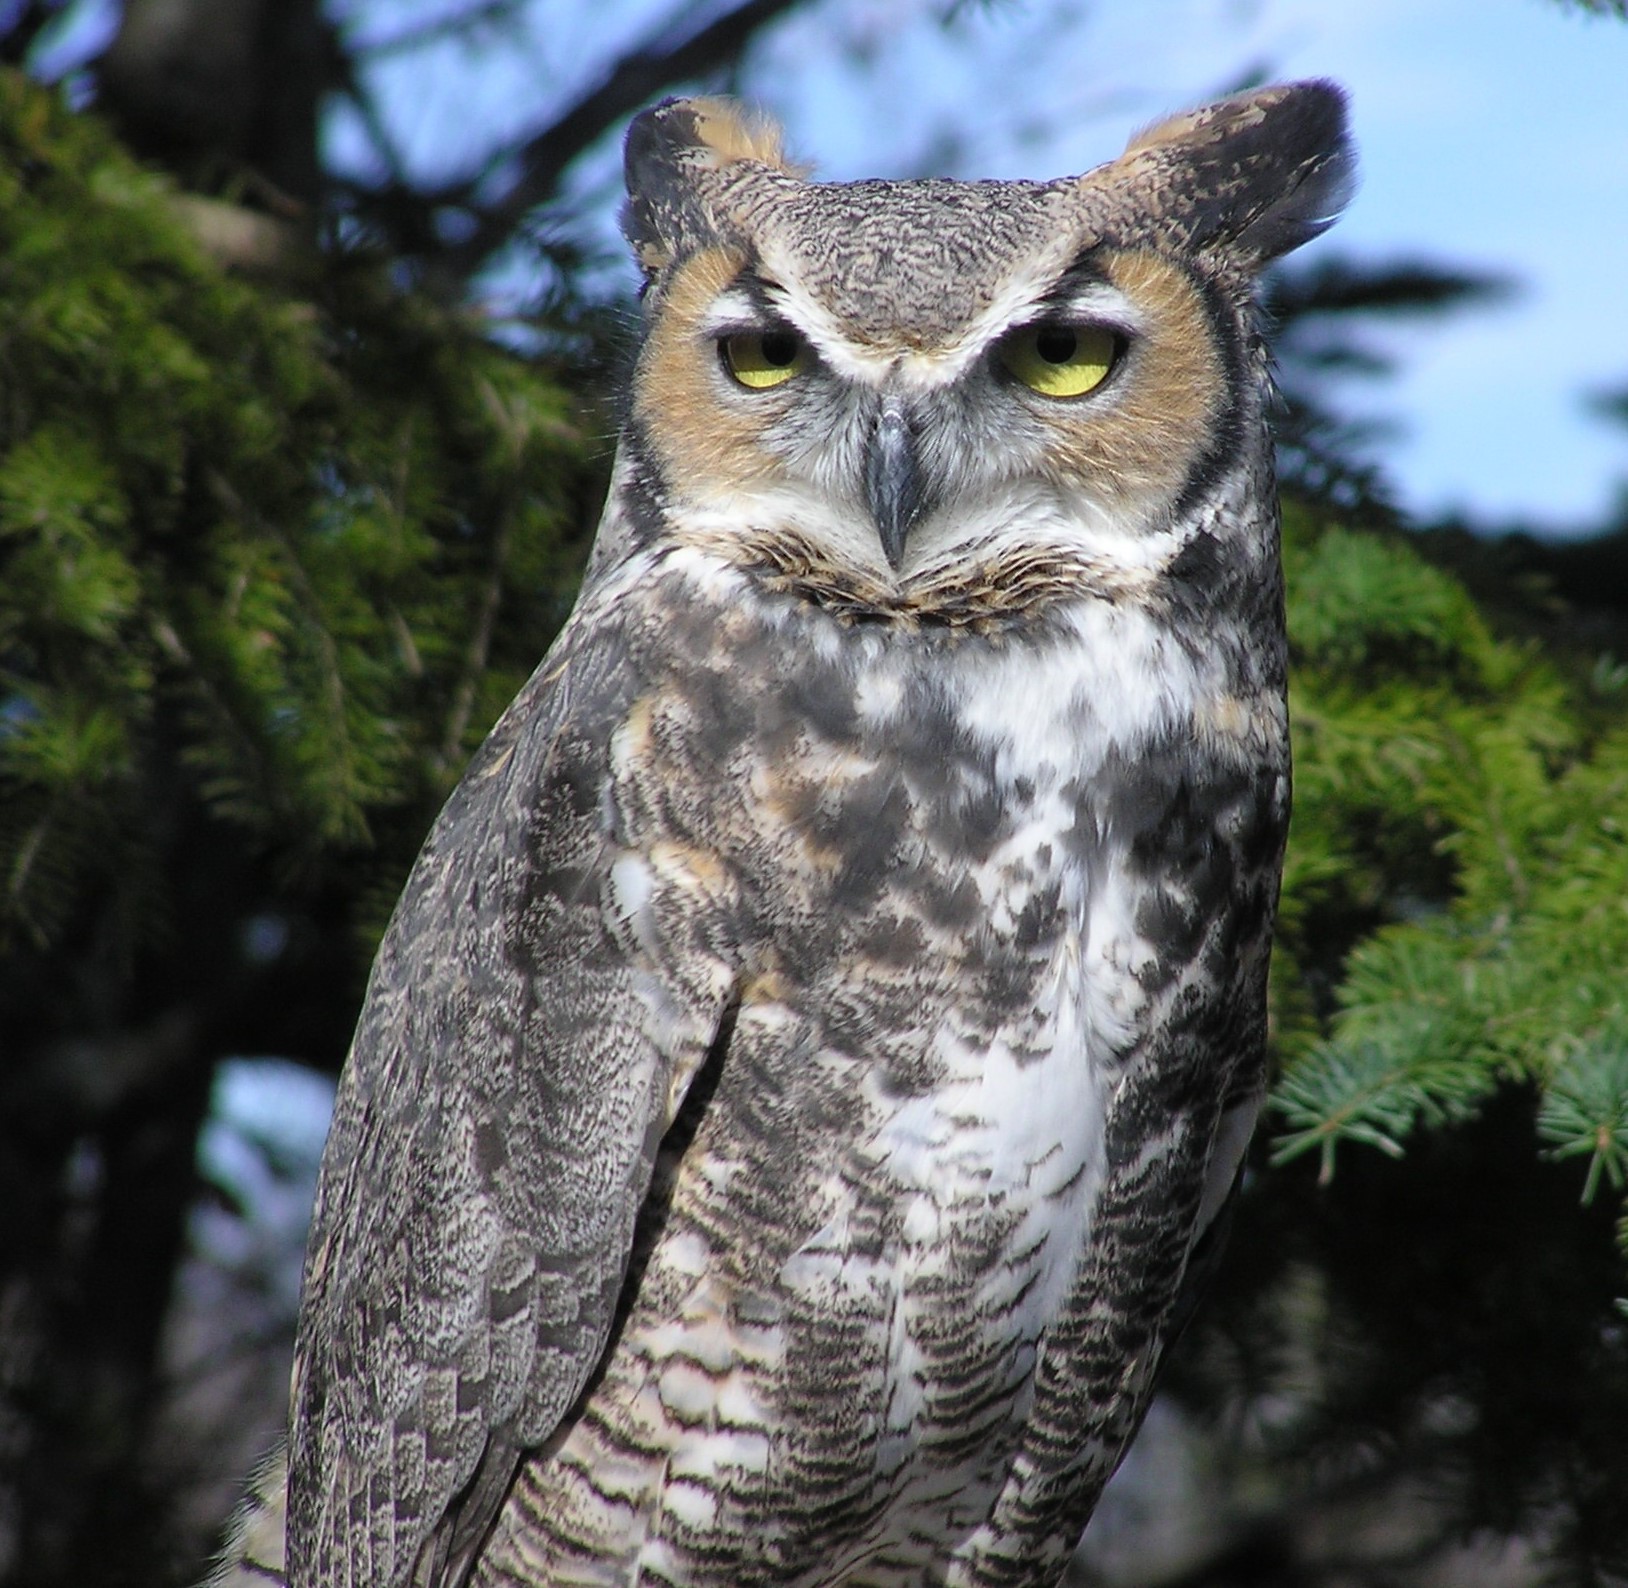 Bubo, the great horned owl